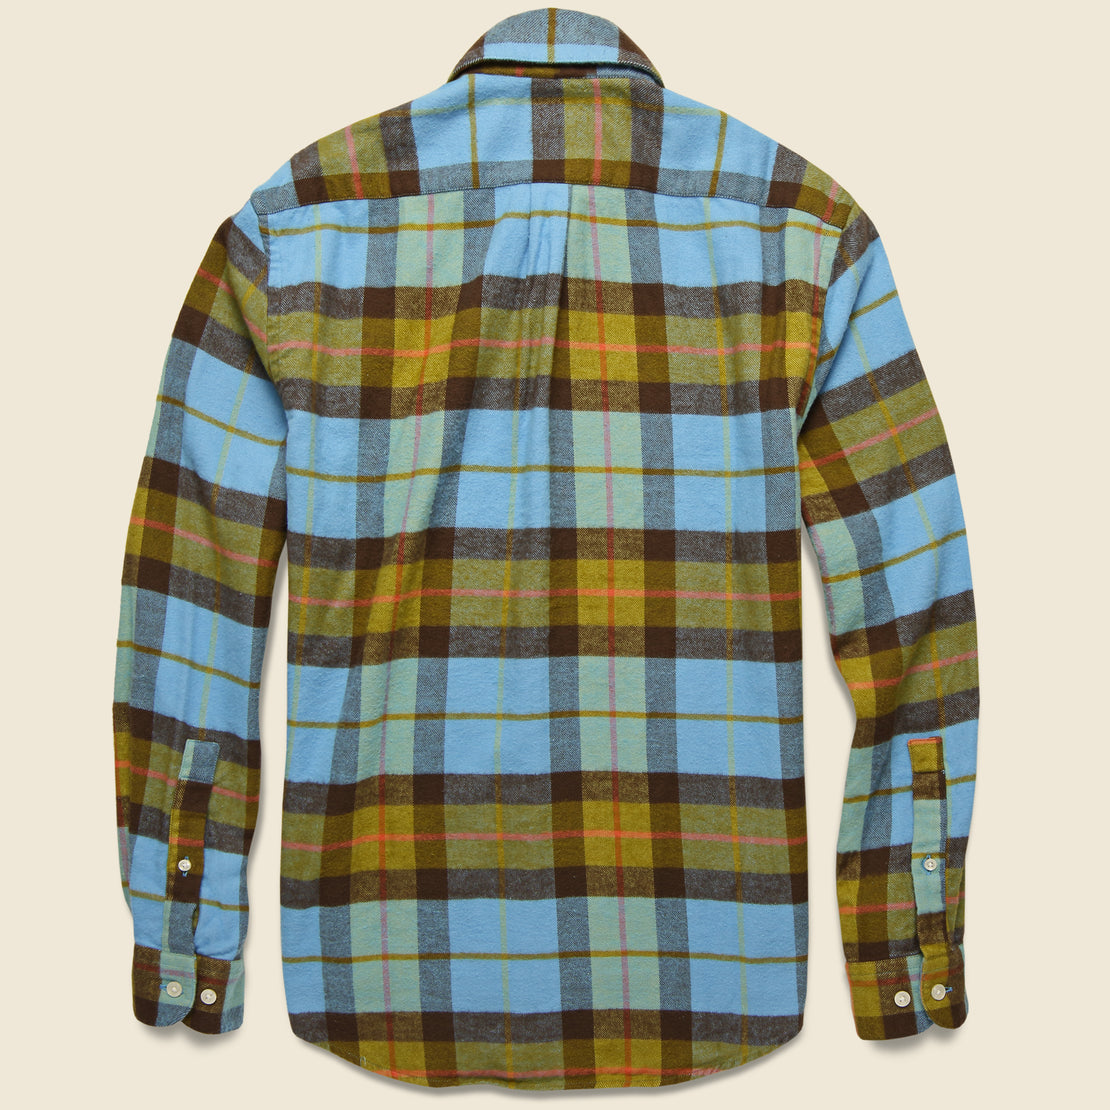 Friendly Check Flannel - Light Blue/Brown - Portuguese Flannel - STAG Provisions - Tops - L/S Woven - Plaid